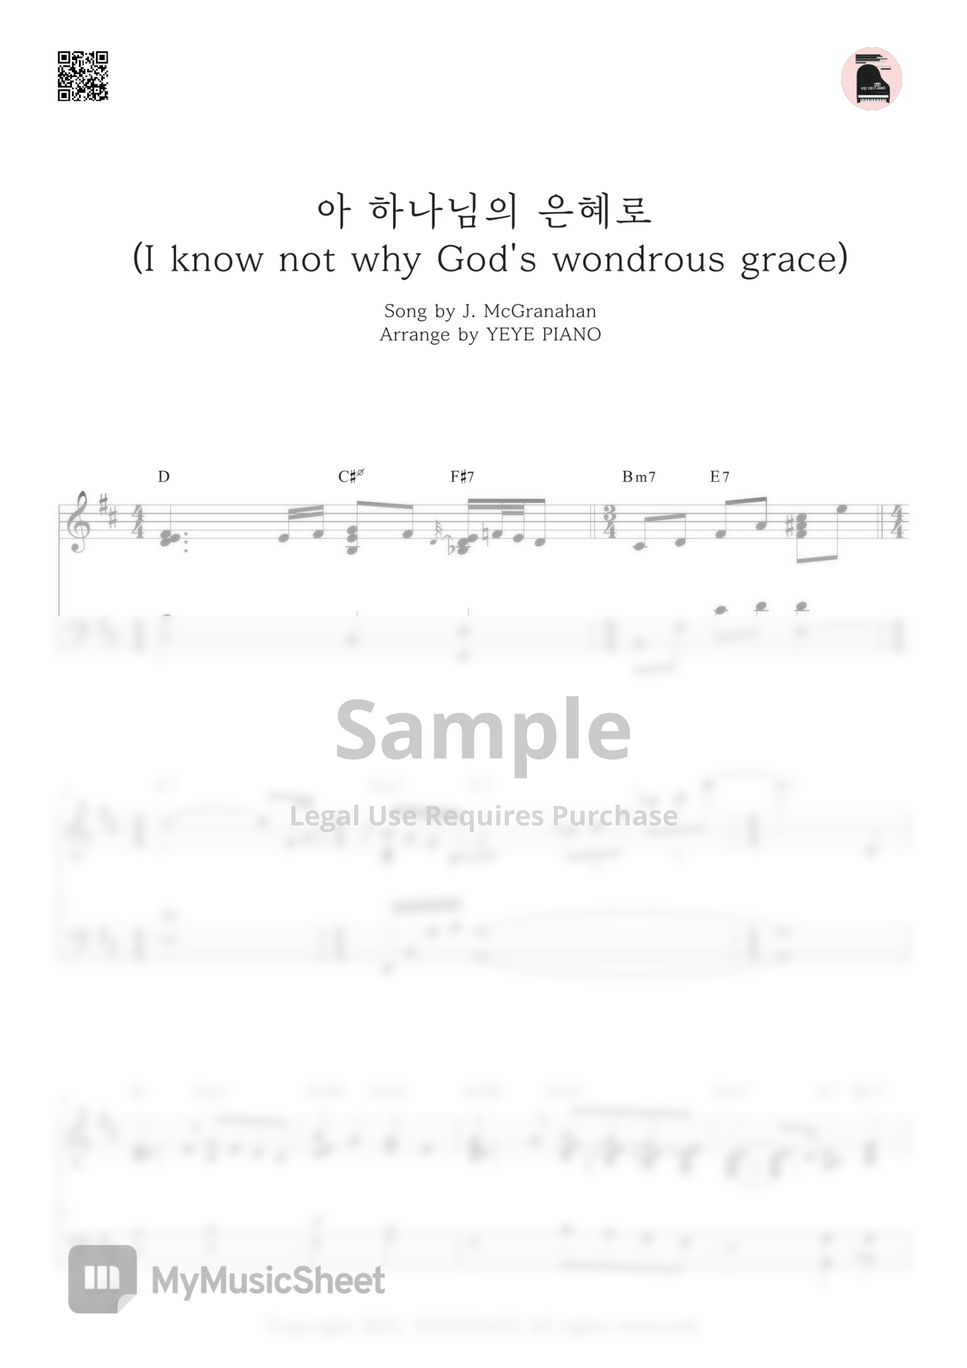 J. McGranahan - I know not why God's wondrous grace ★★★★★ by YEYE PIANO